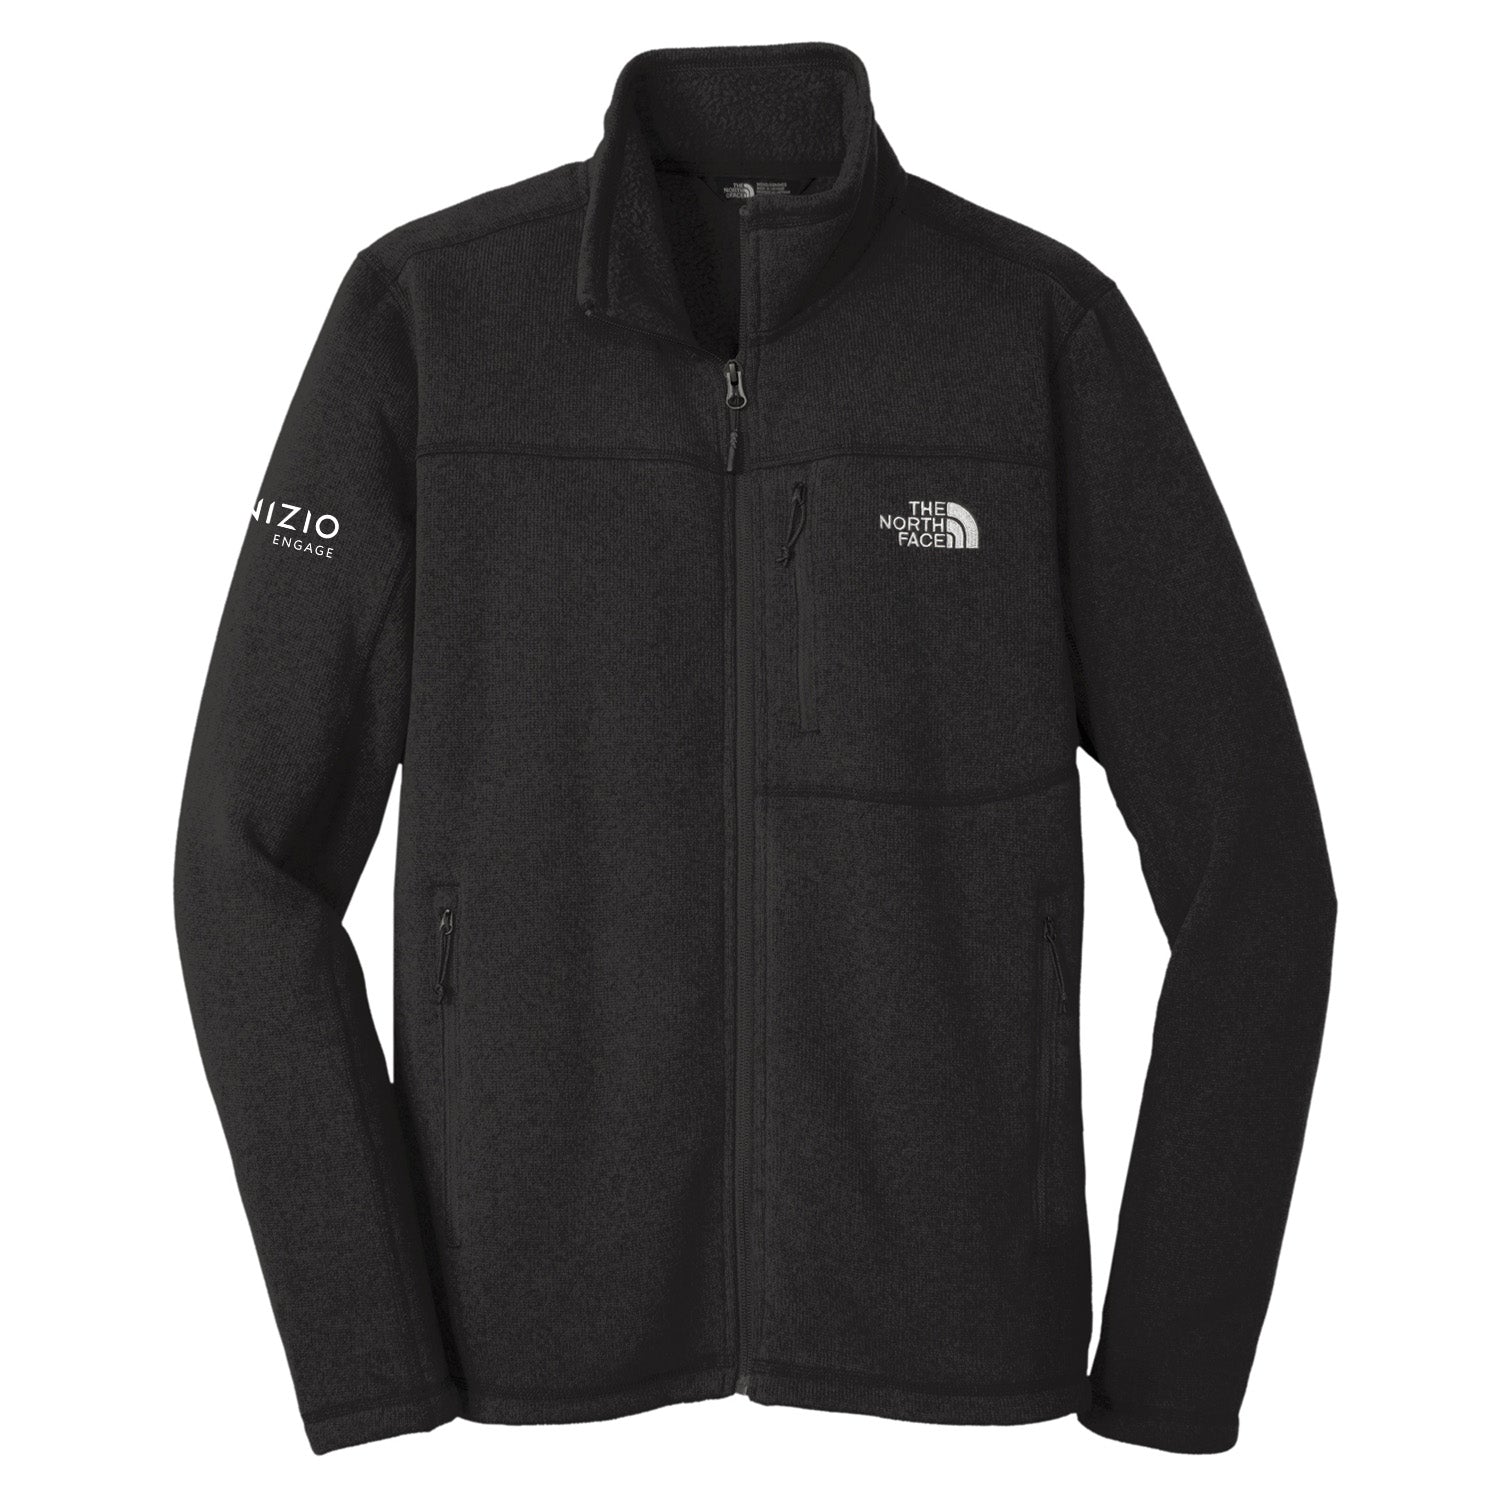 The North Face Sweater Fleece Jacket - Men's – Inizio Engage Store EU